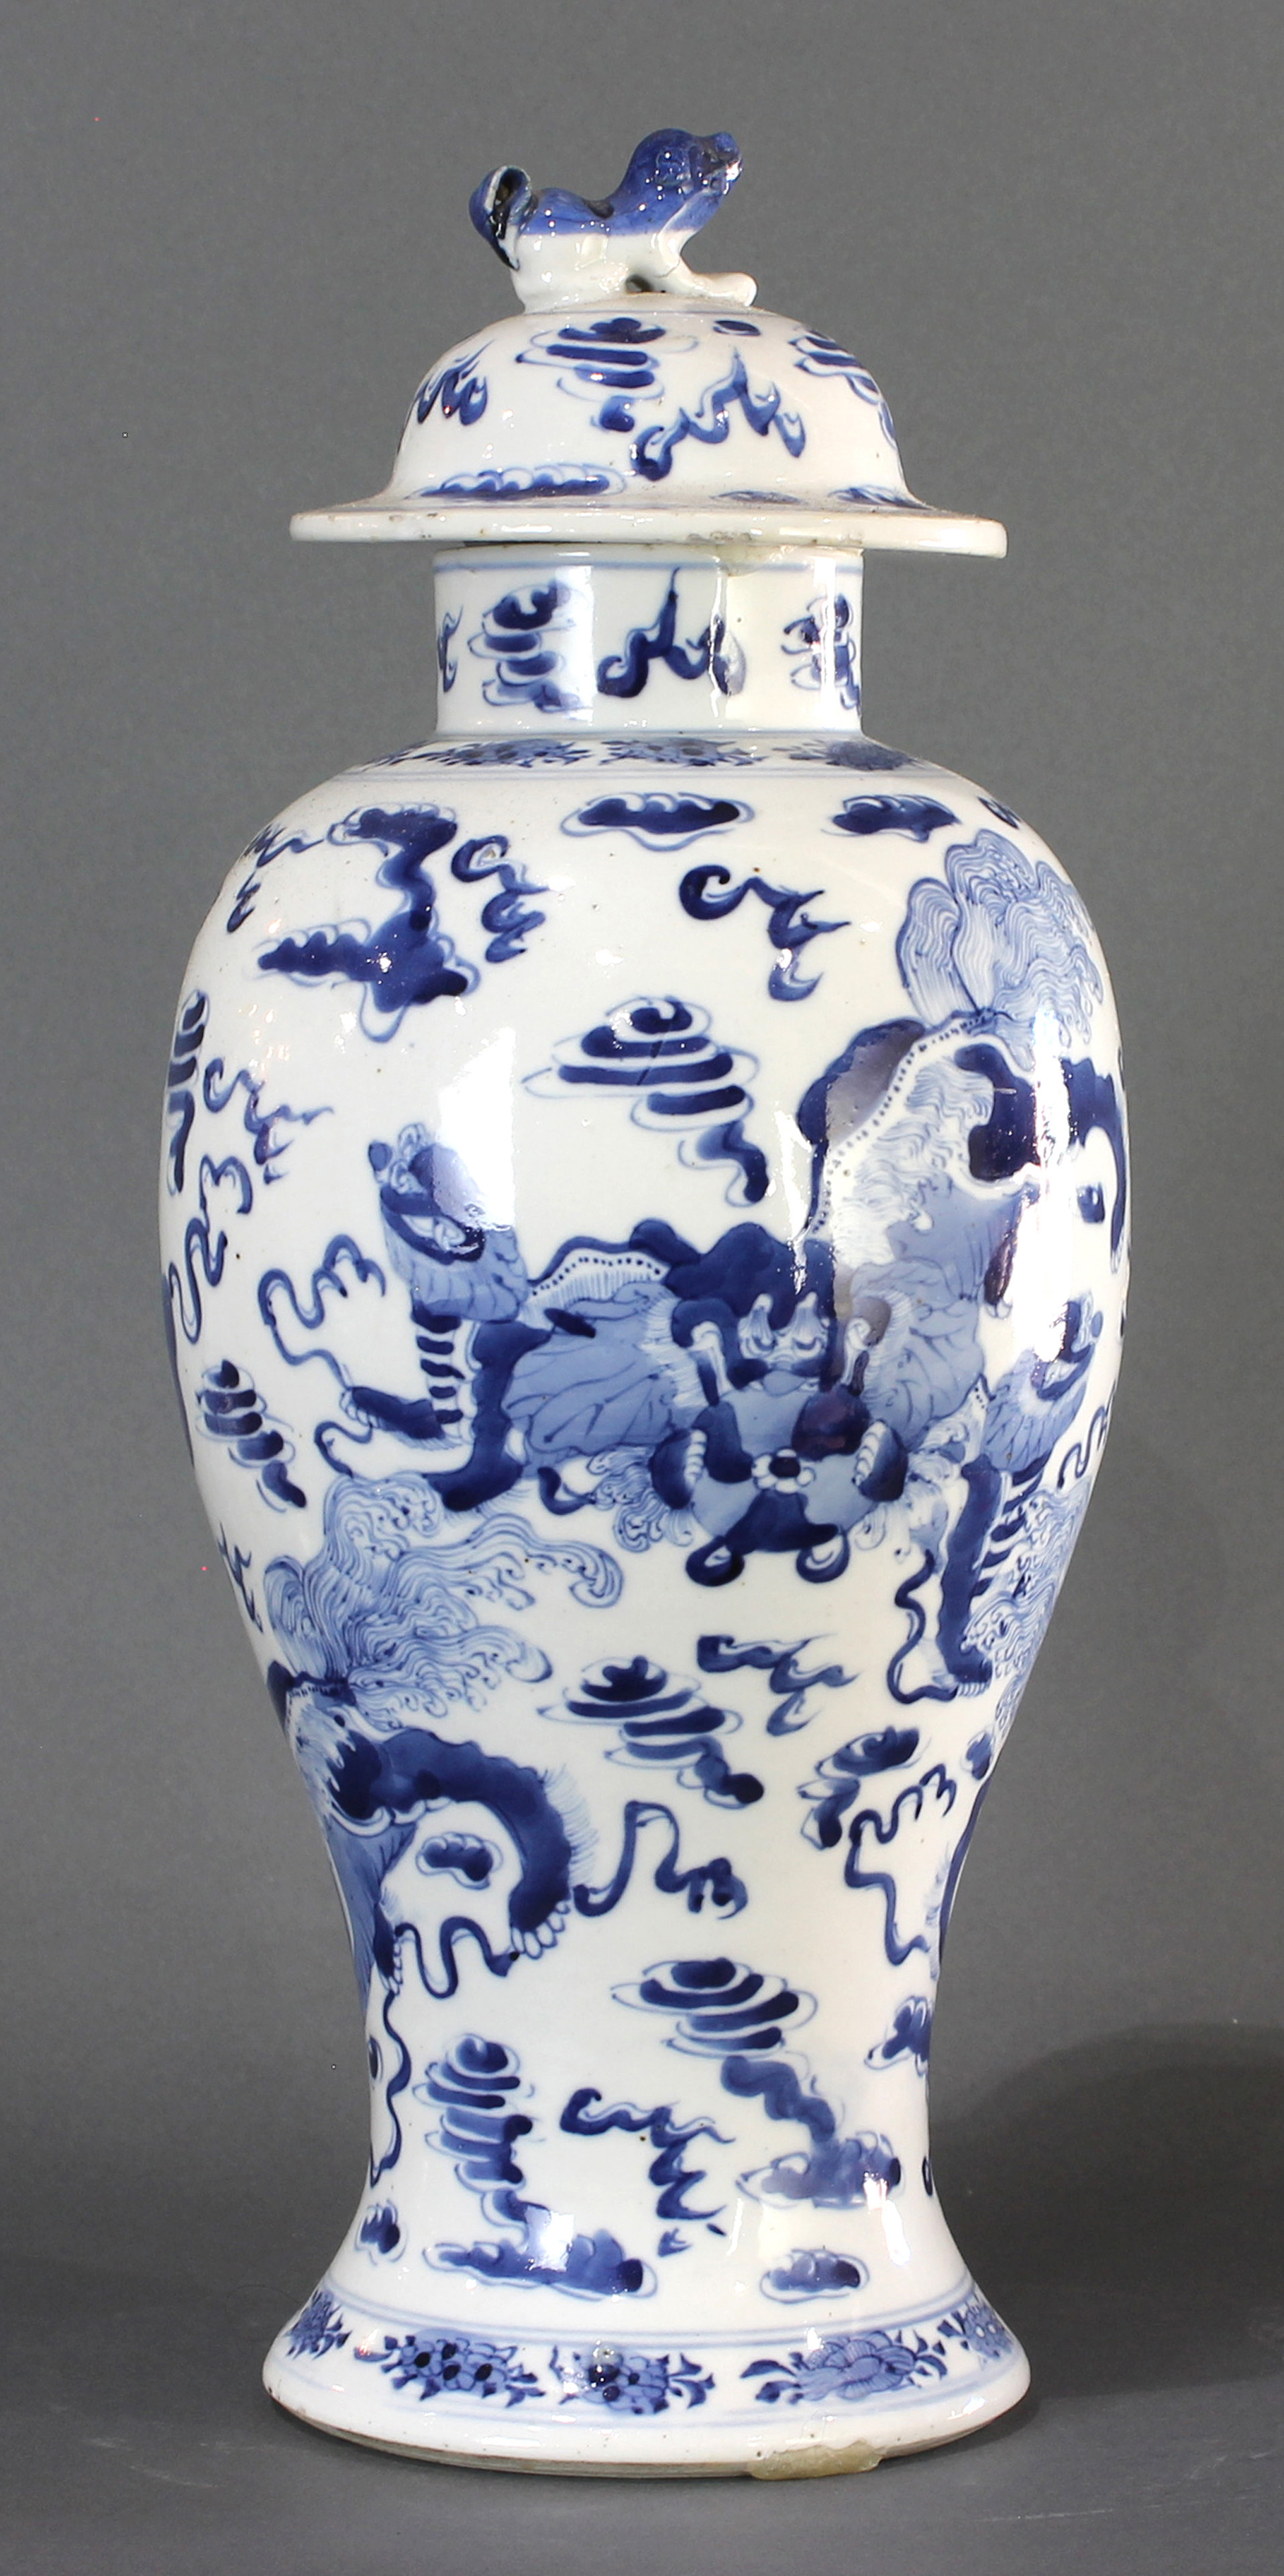 A CHINESE BLUE AND WHITE QILIN COVERED